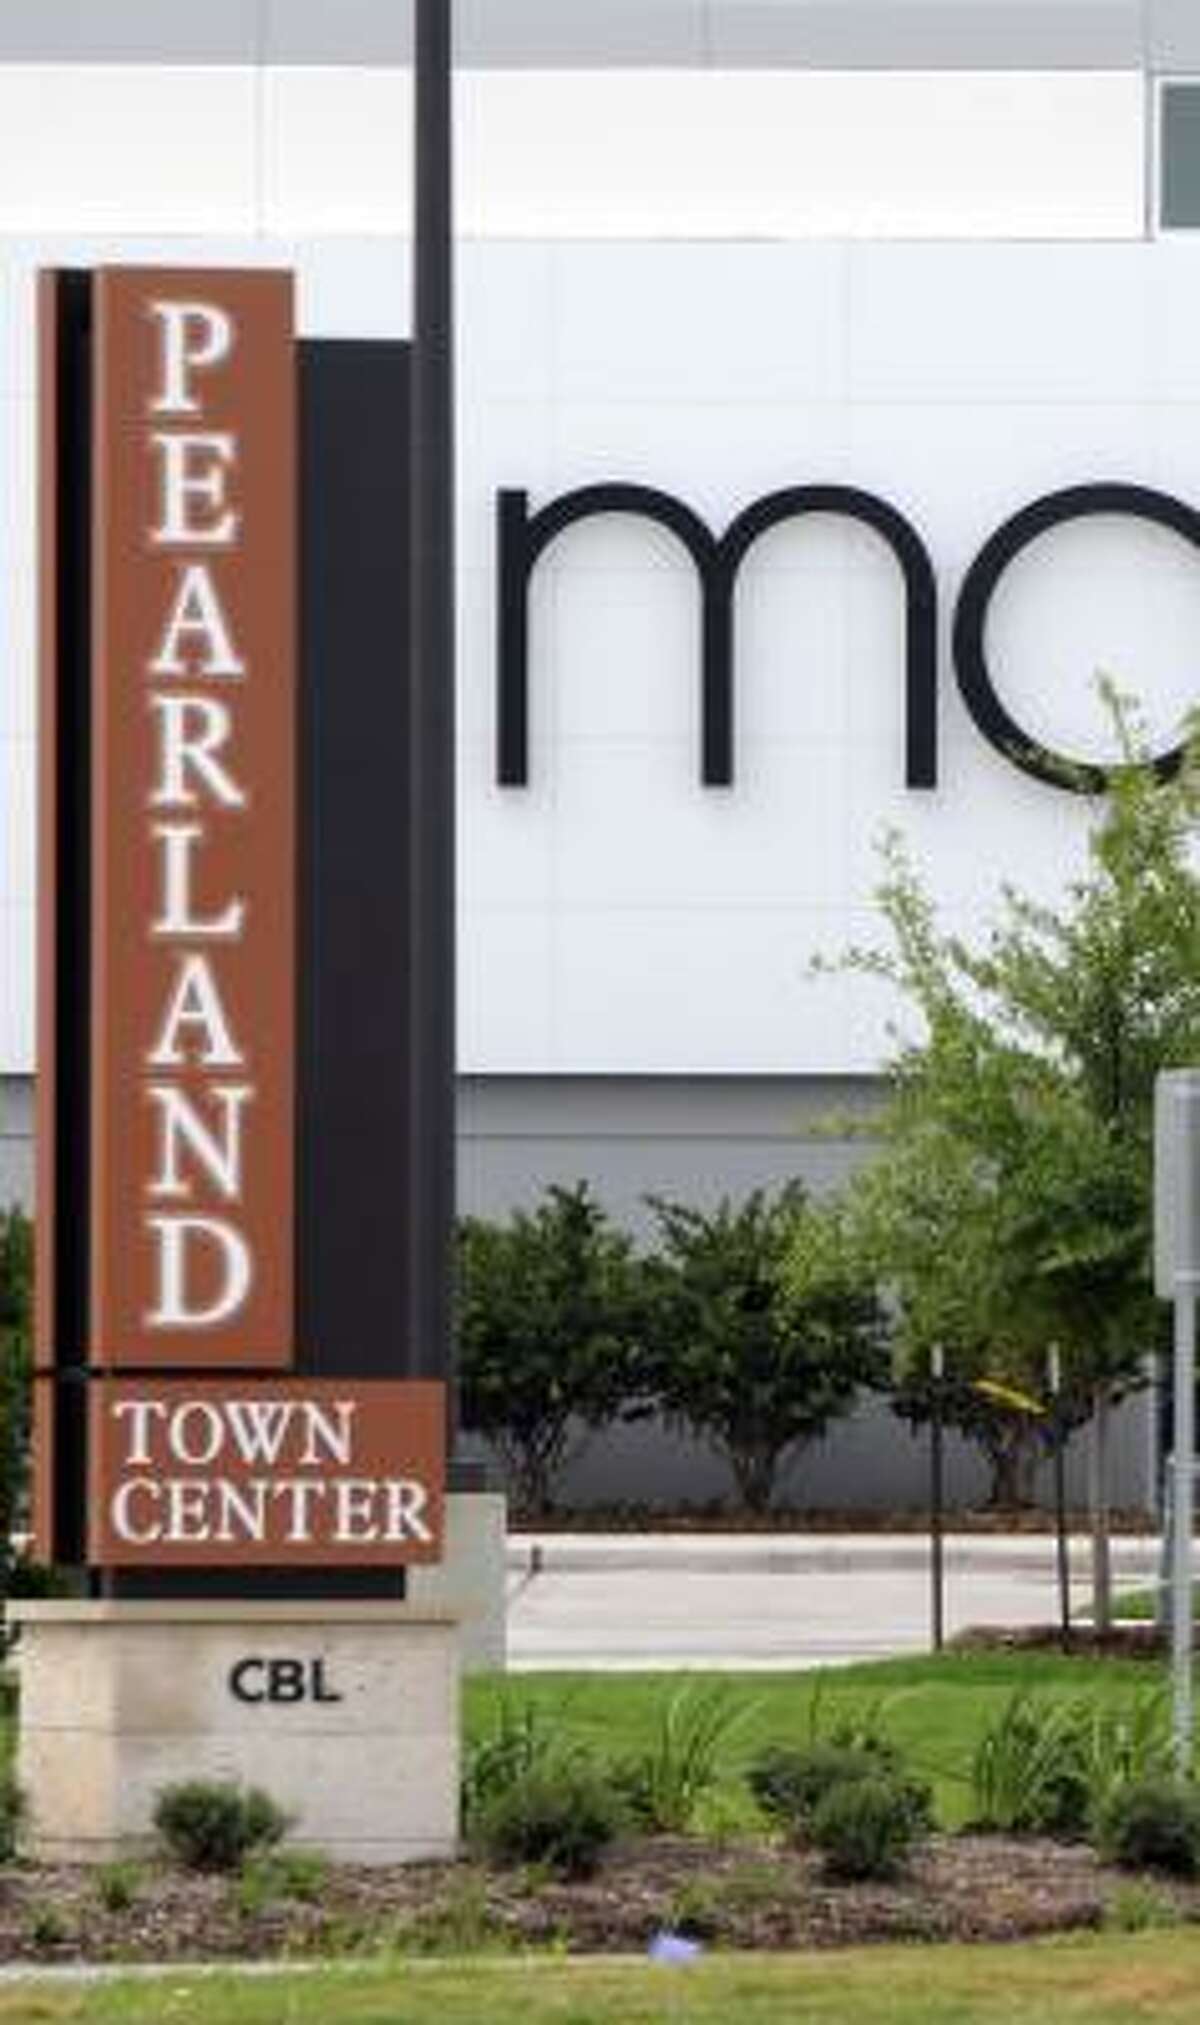 Macy's took advantage of the chance to open a store in the expanding Pearland area.